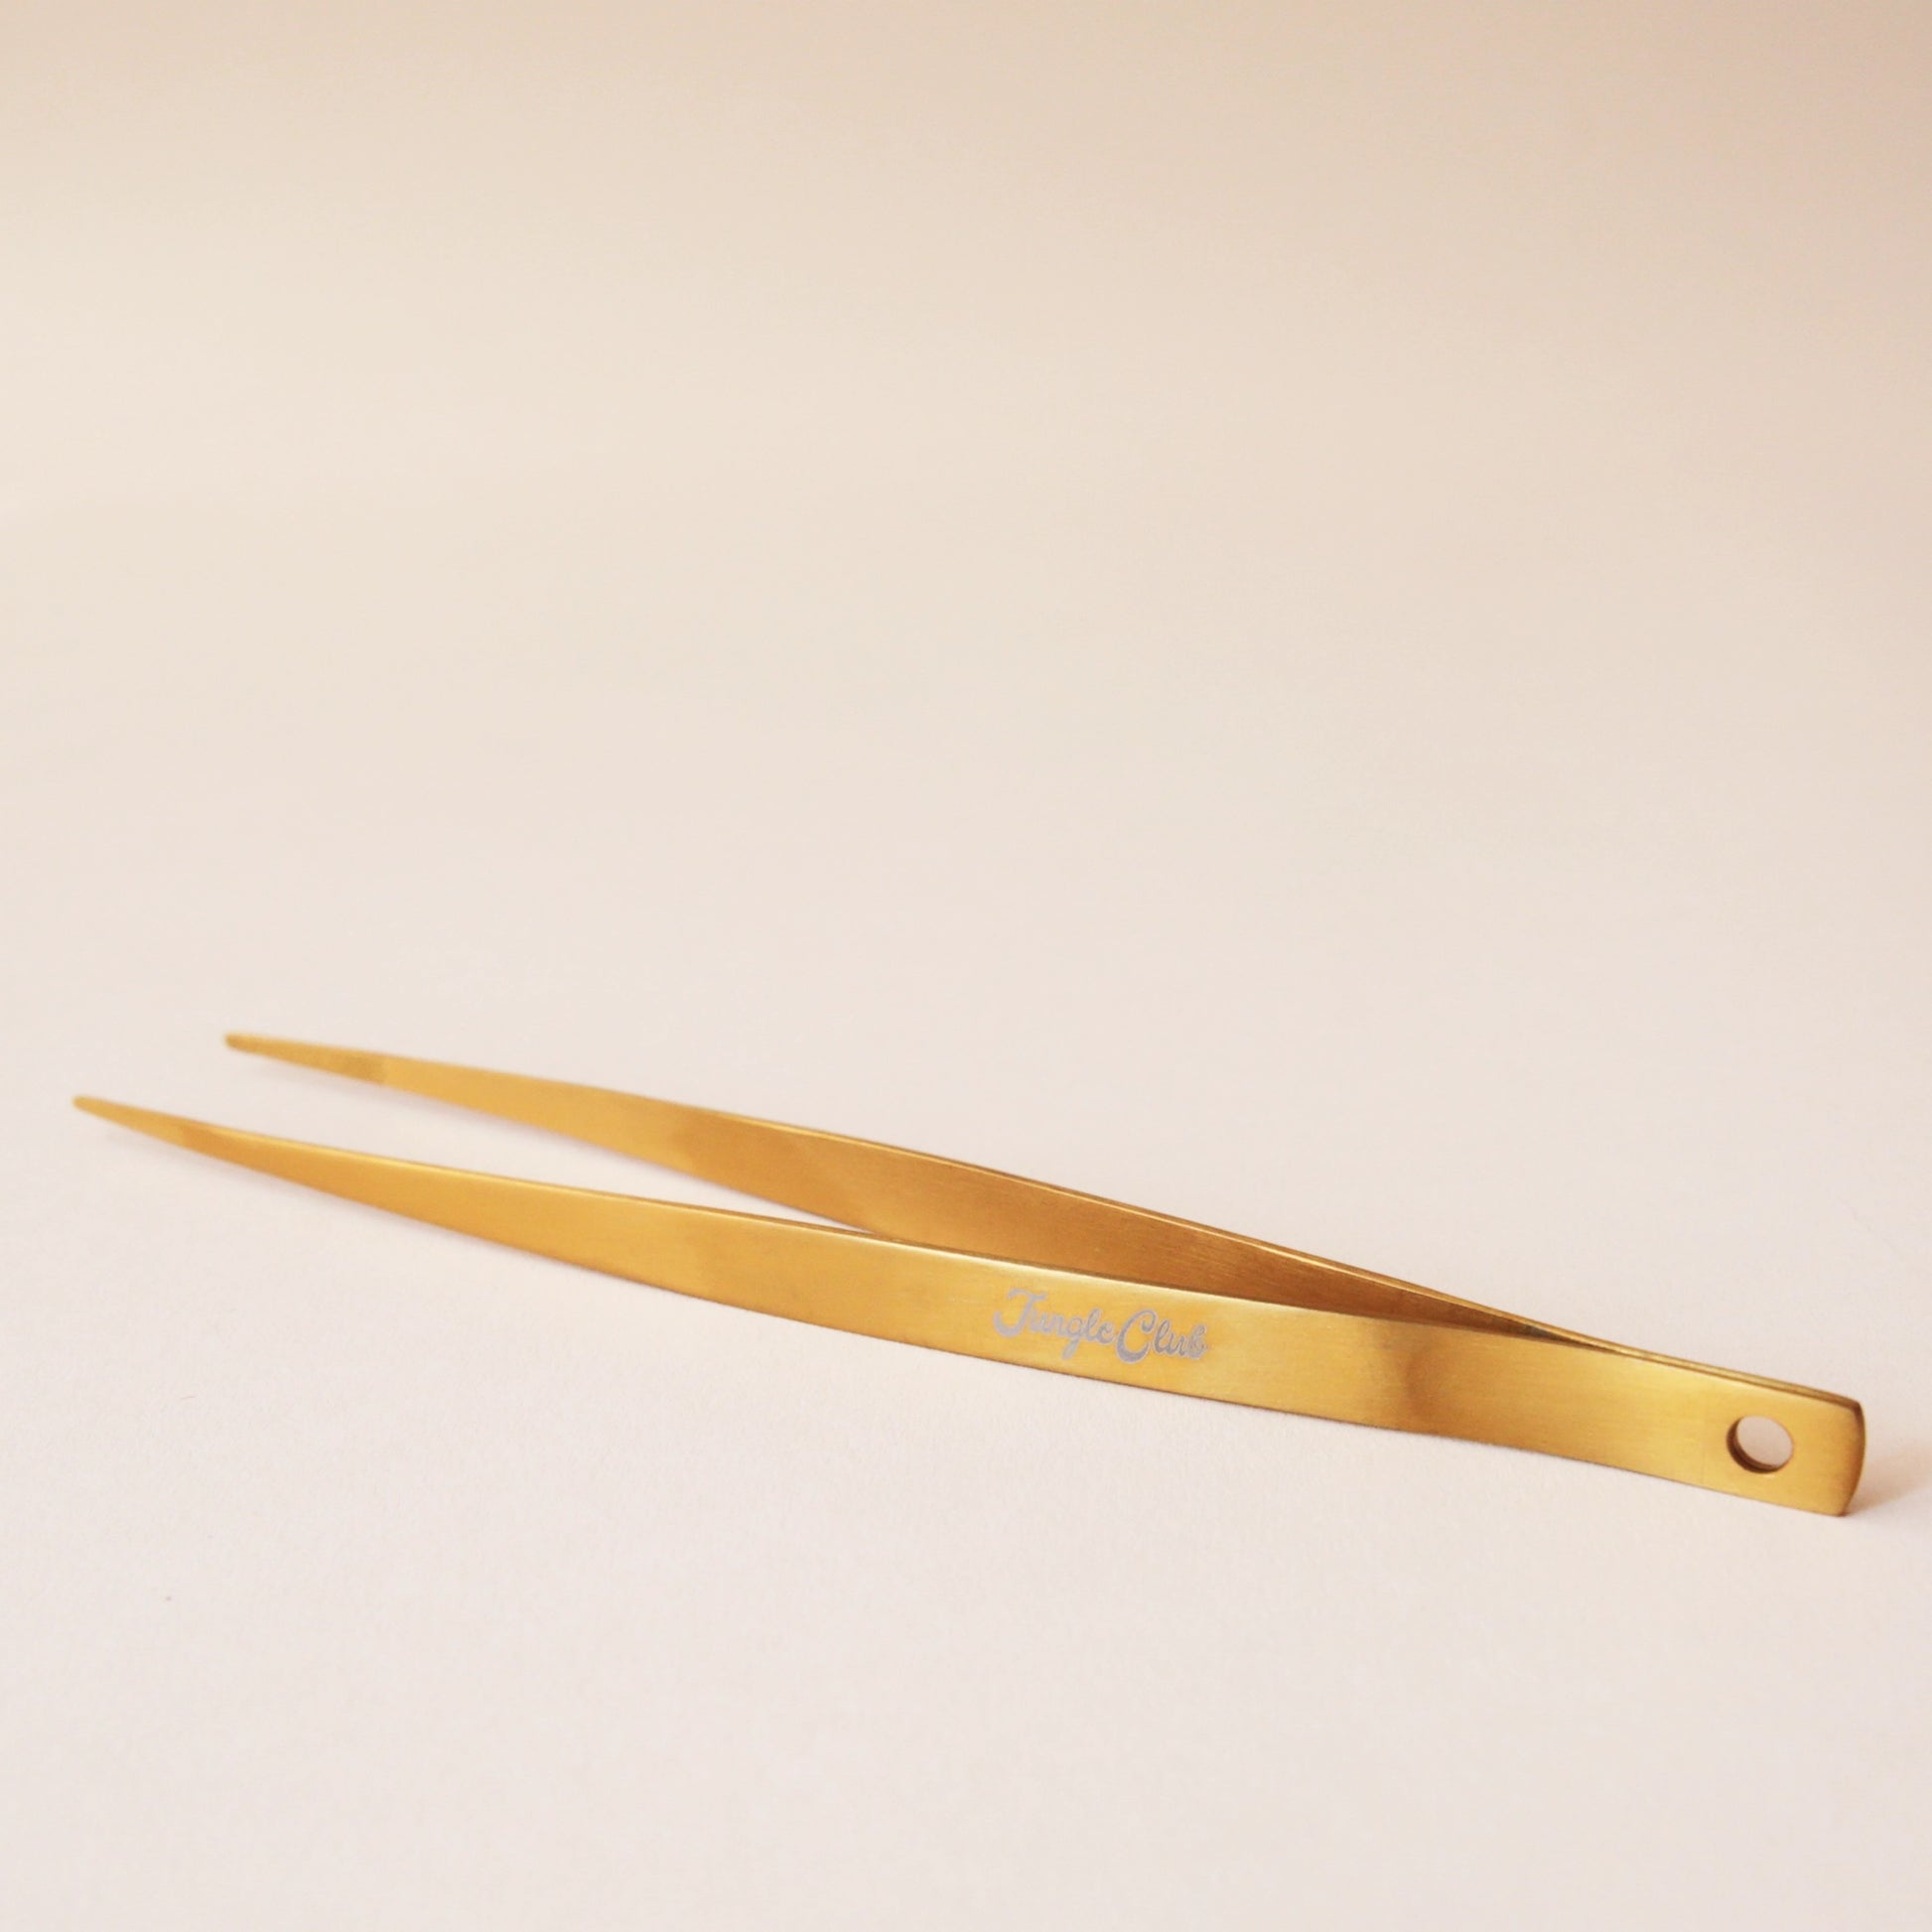 Brass tweezers with a slim design and a pointed tip perfect for handling spiky cacti. On the side of the tweezer there is text that reads, "Jungle Club" I white cursive.